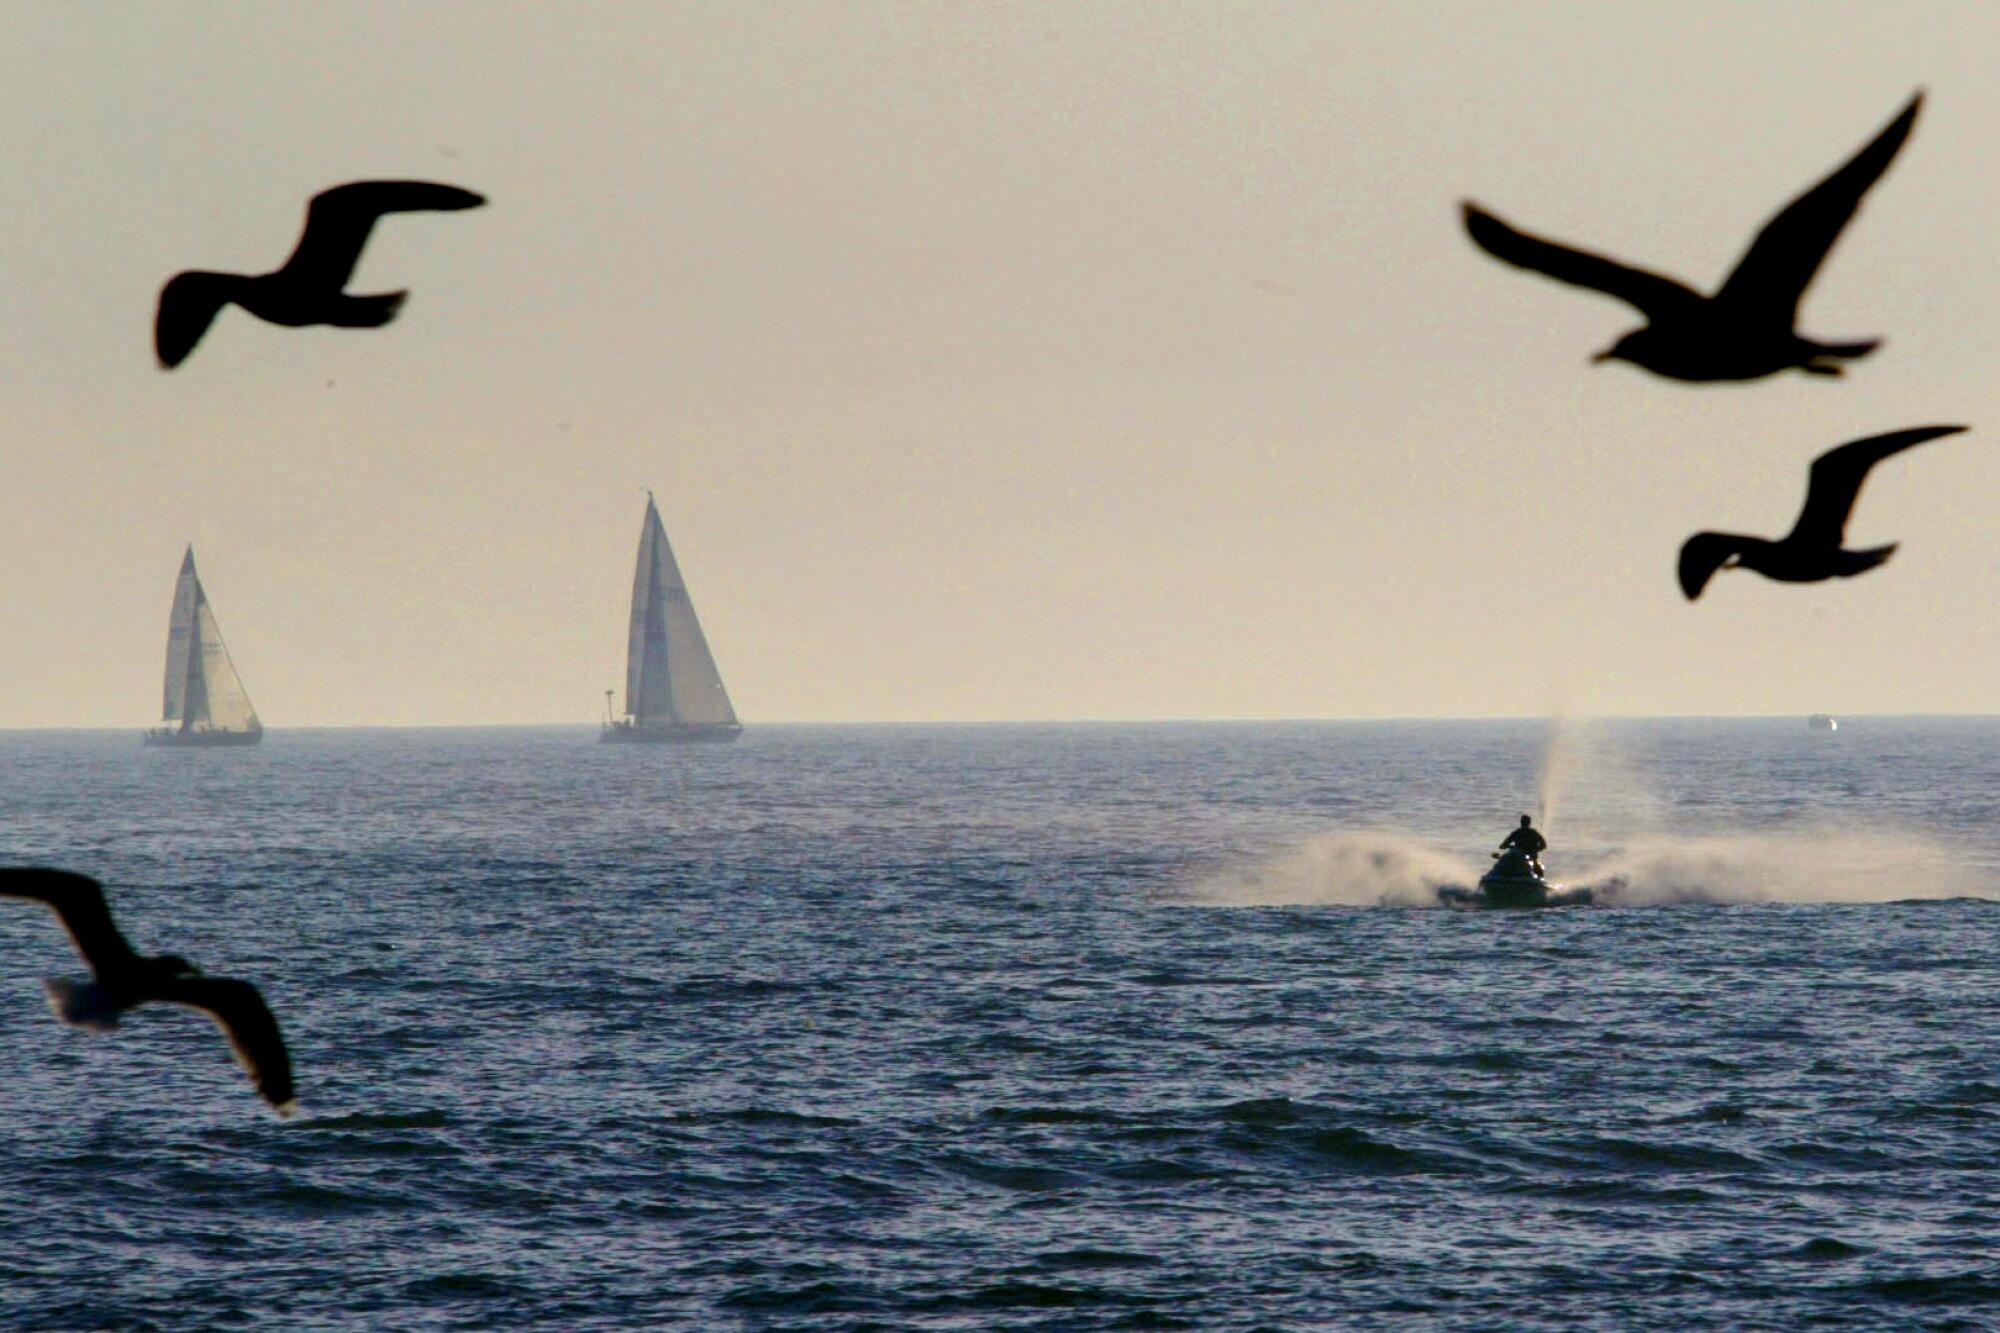 A person on a jetski out in the ocean with seagulls and sailboats. 